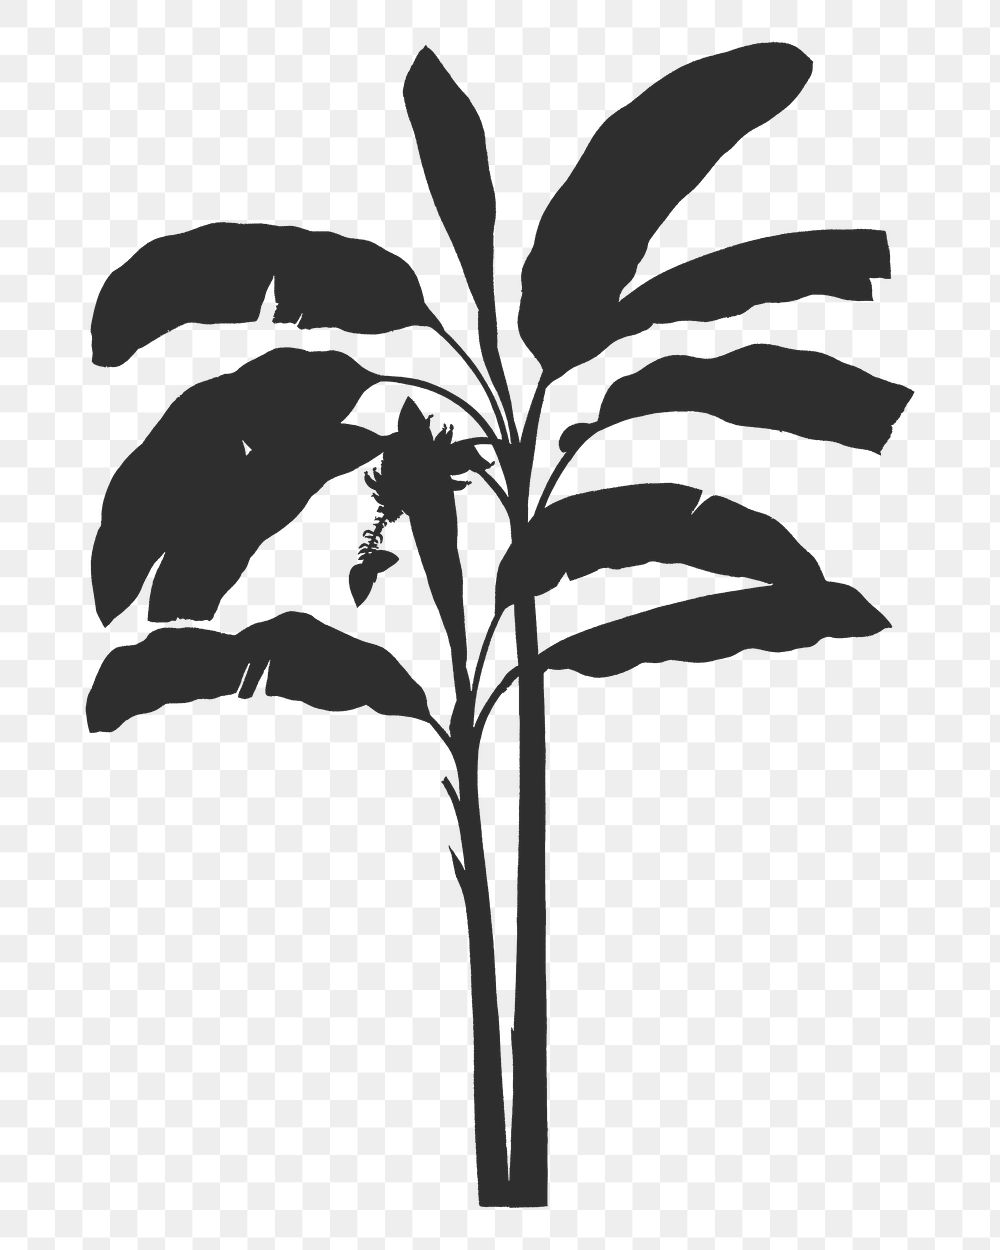 Png banana tree shadow on transparent background